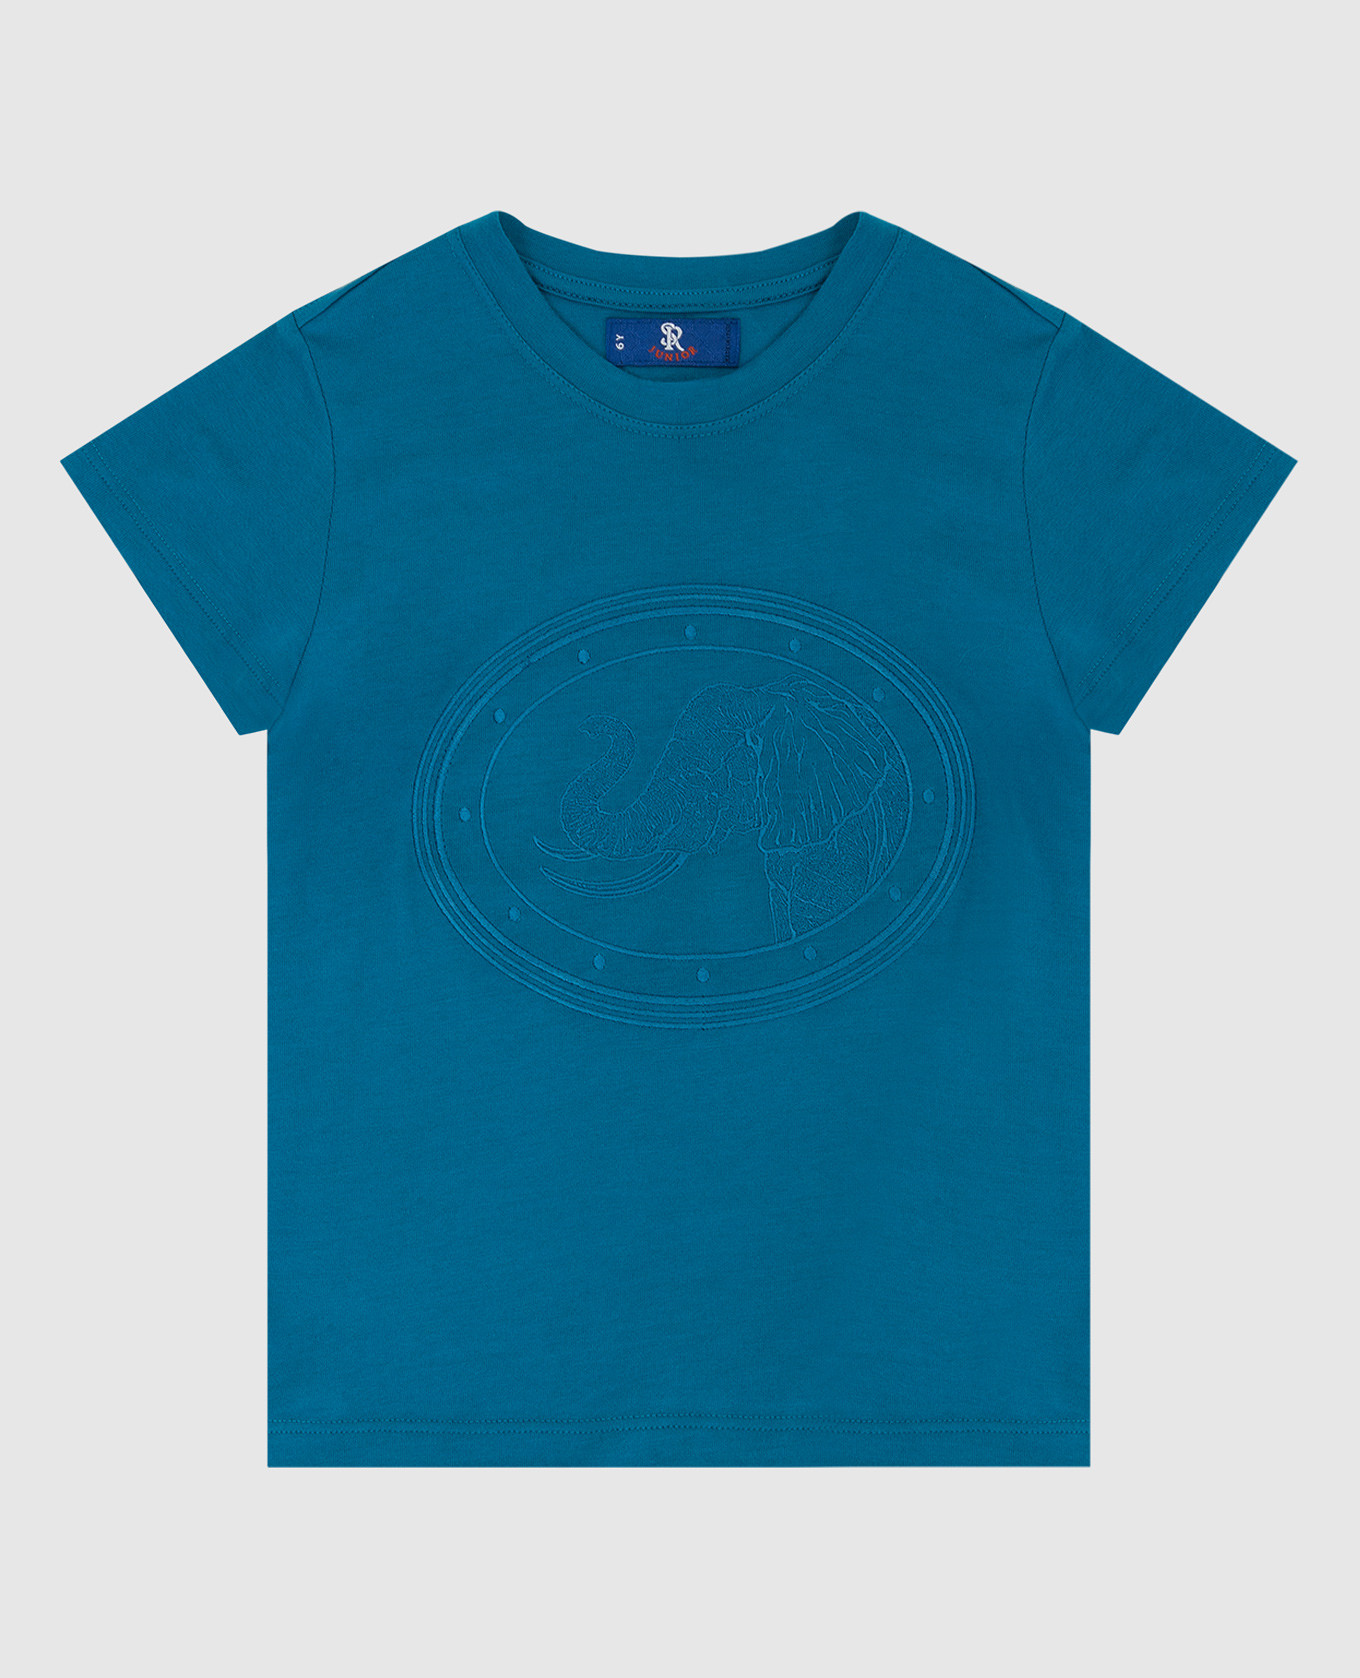 Children's turquoise t-shirt with embroidery